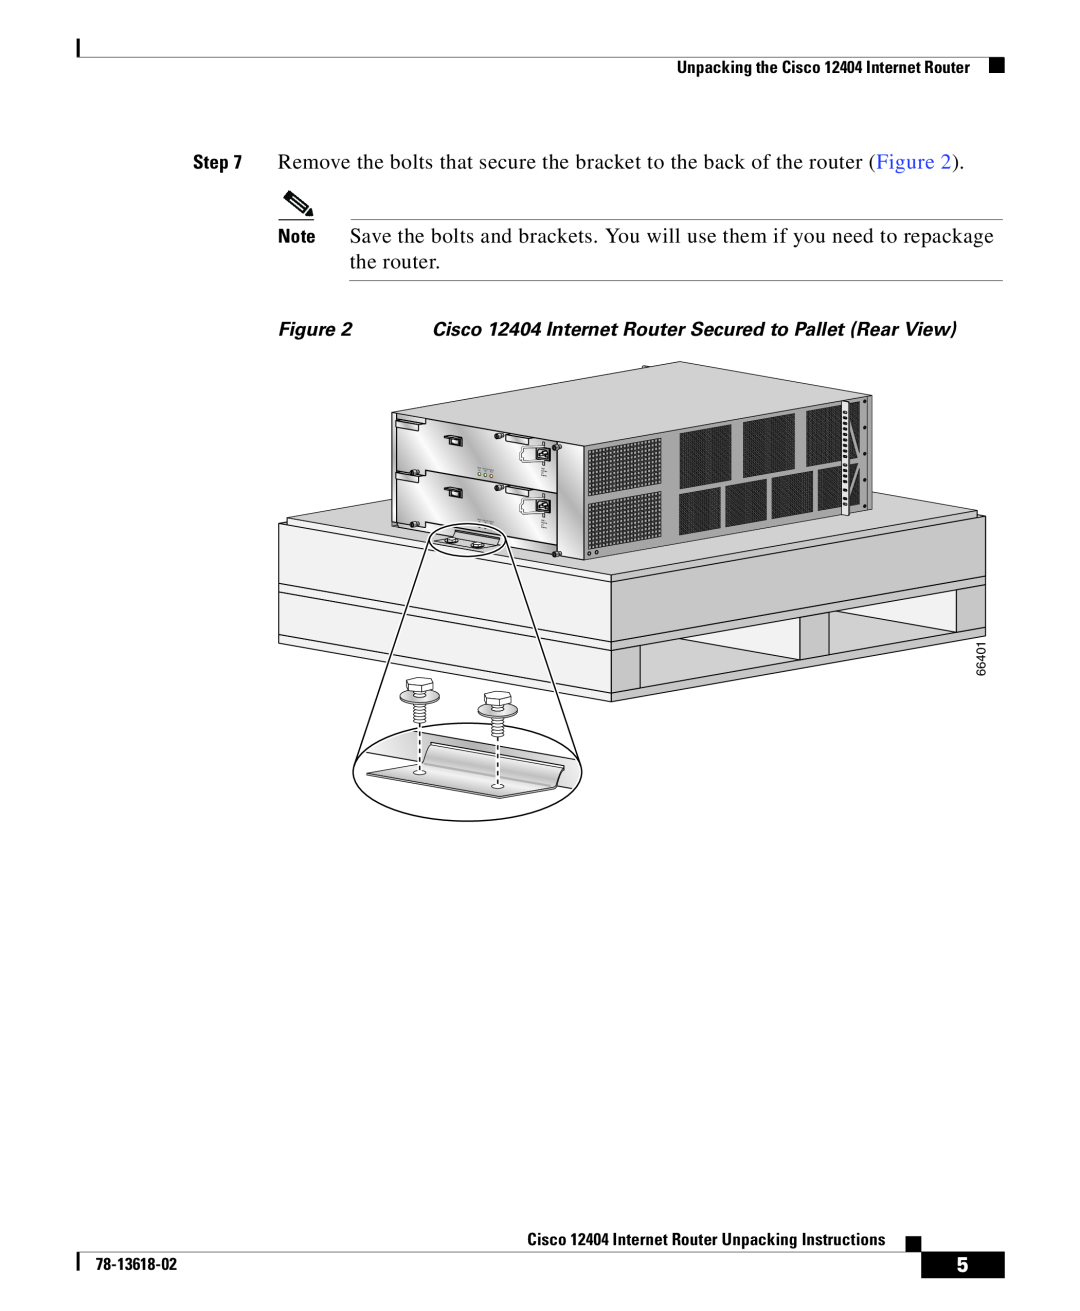 Cisco Systems manual Cisco 12404 Internet Router Secured to Pallet Rear View 